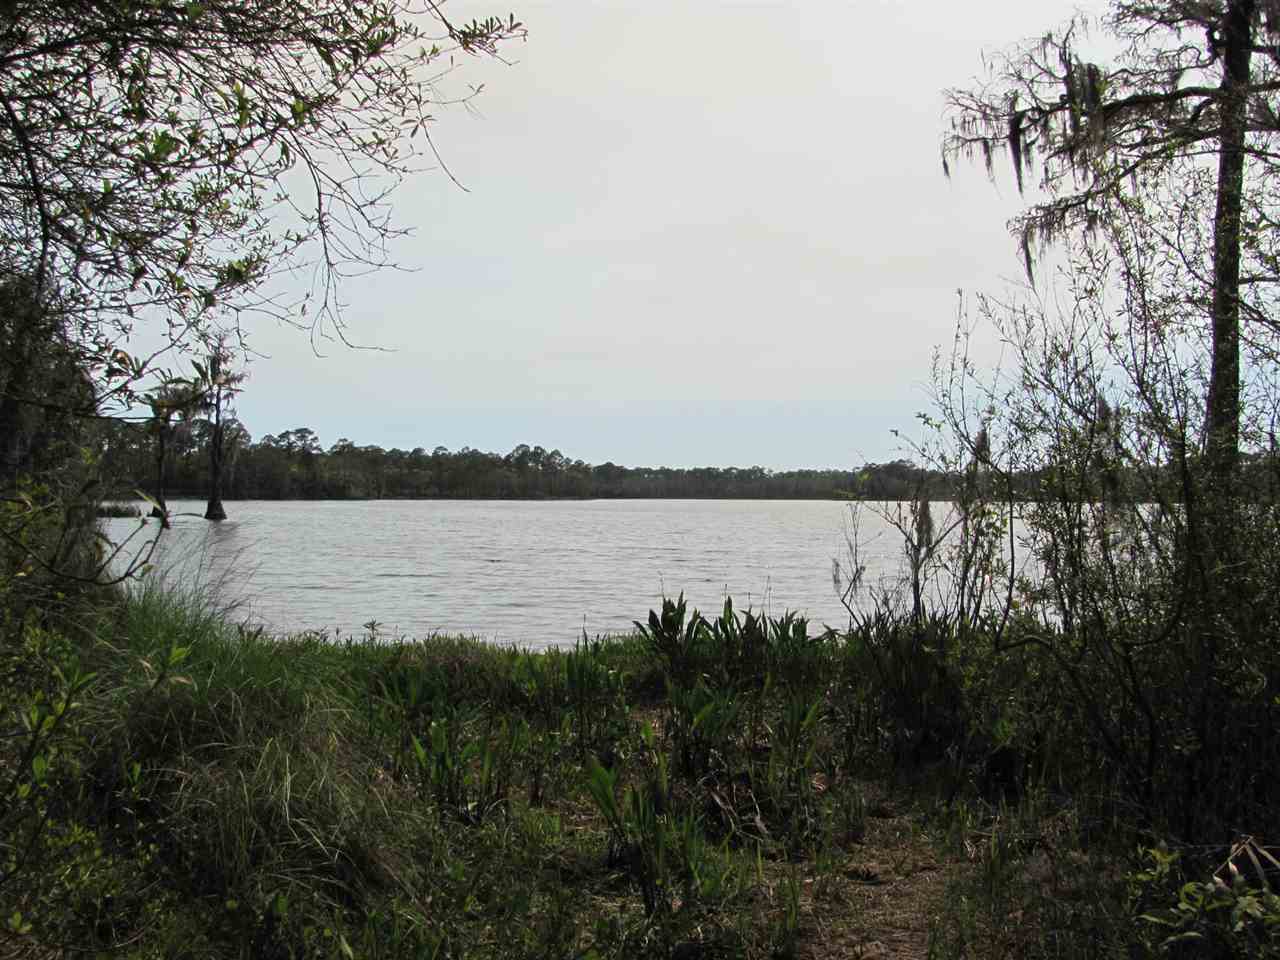 Lucy,PANACEA,Florida 32346,Lots and land,Lucy,364378